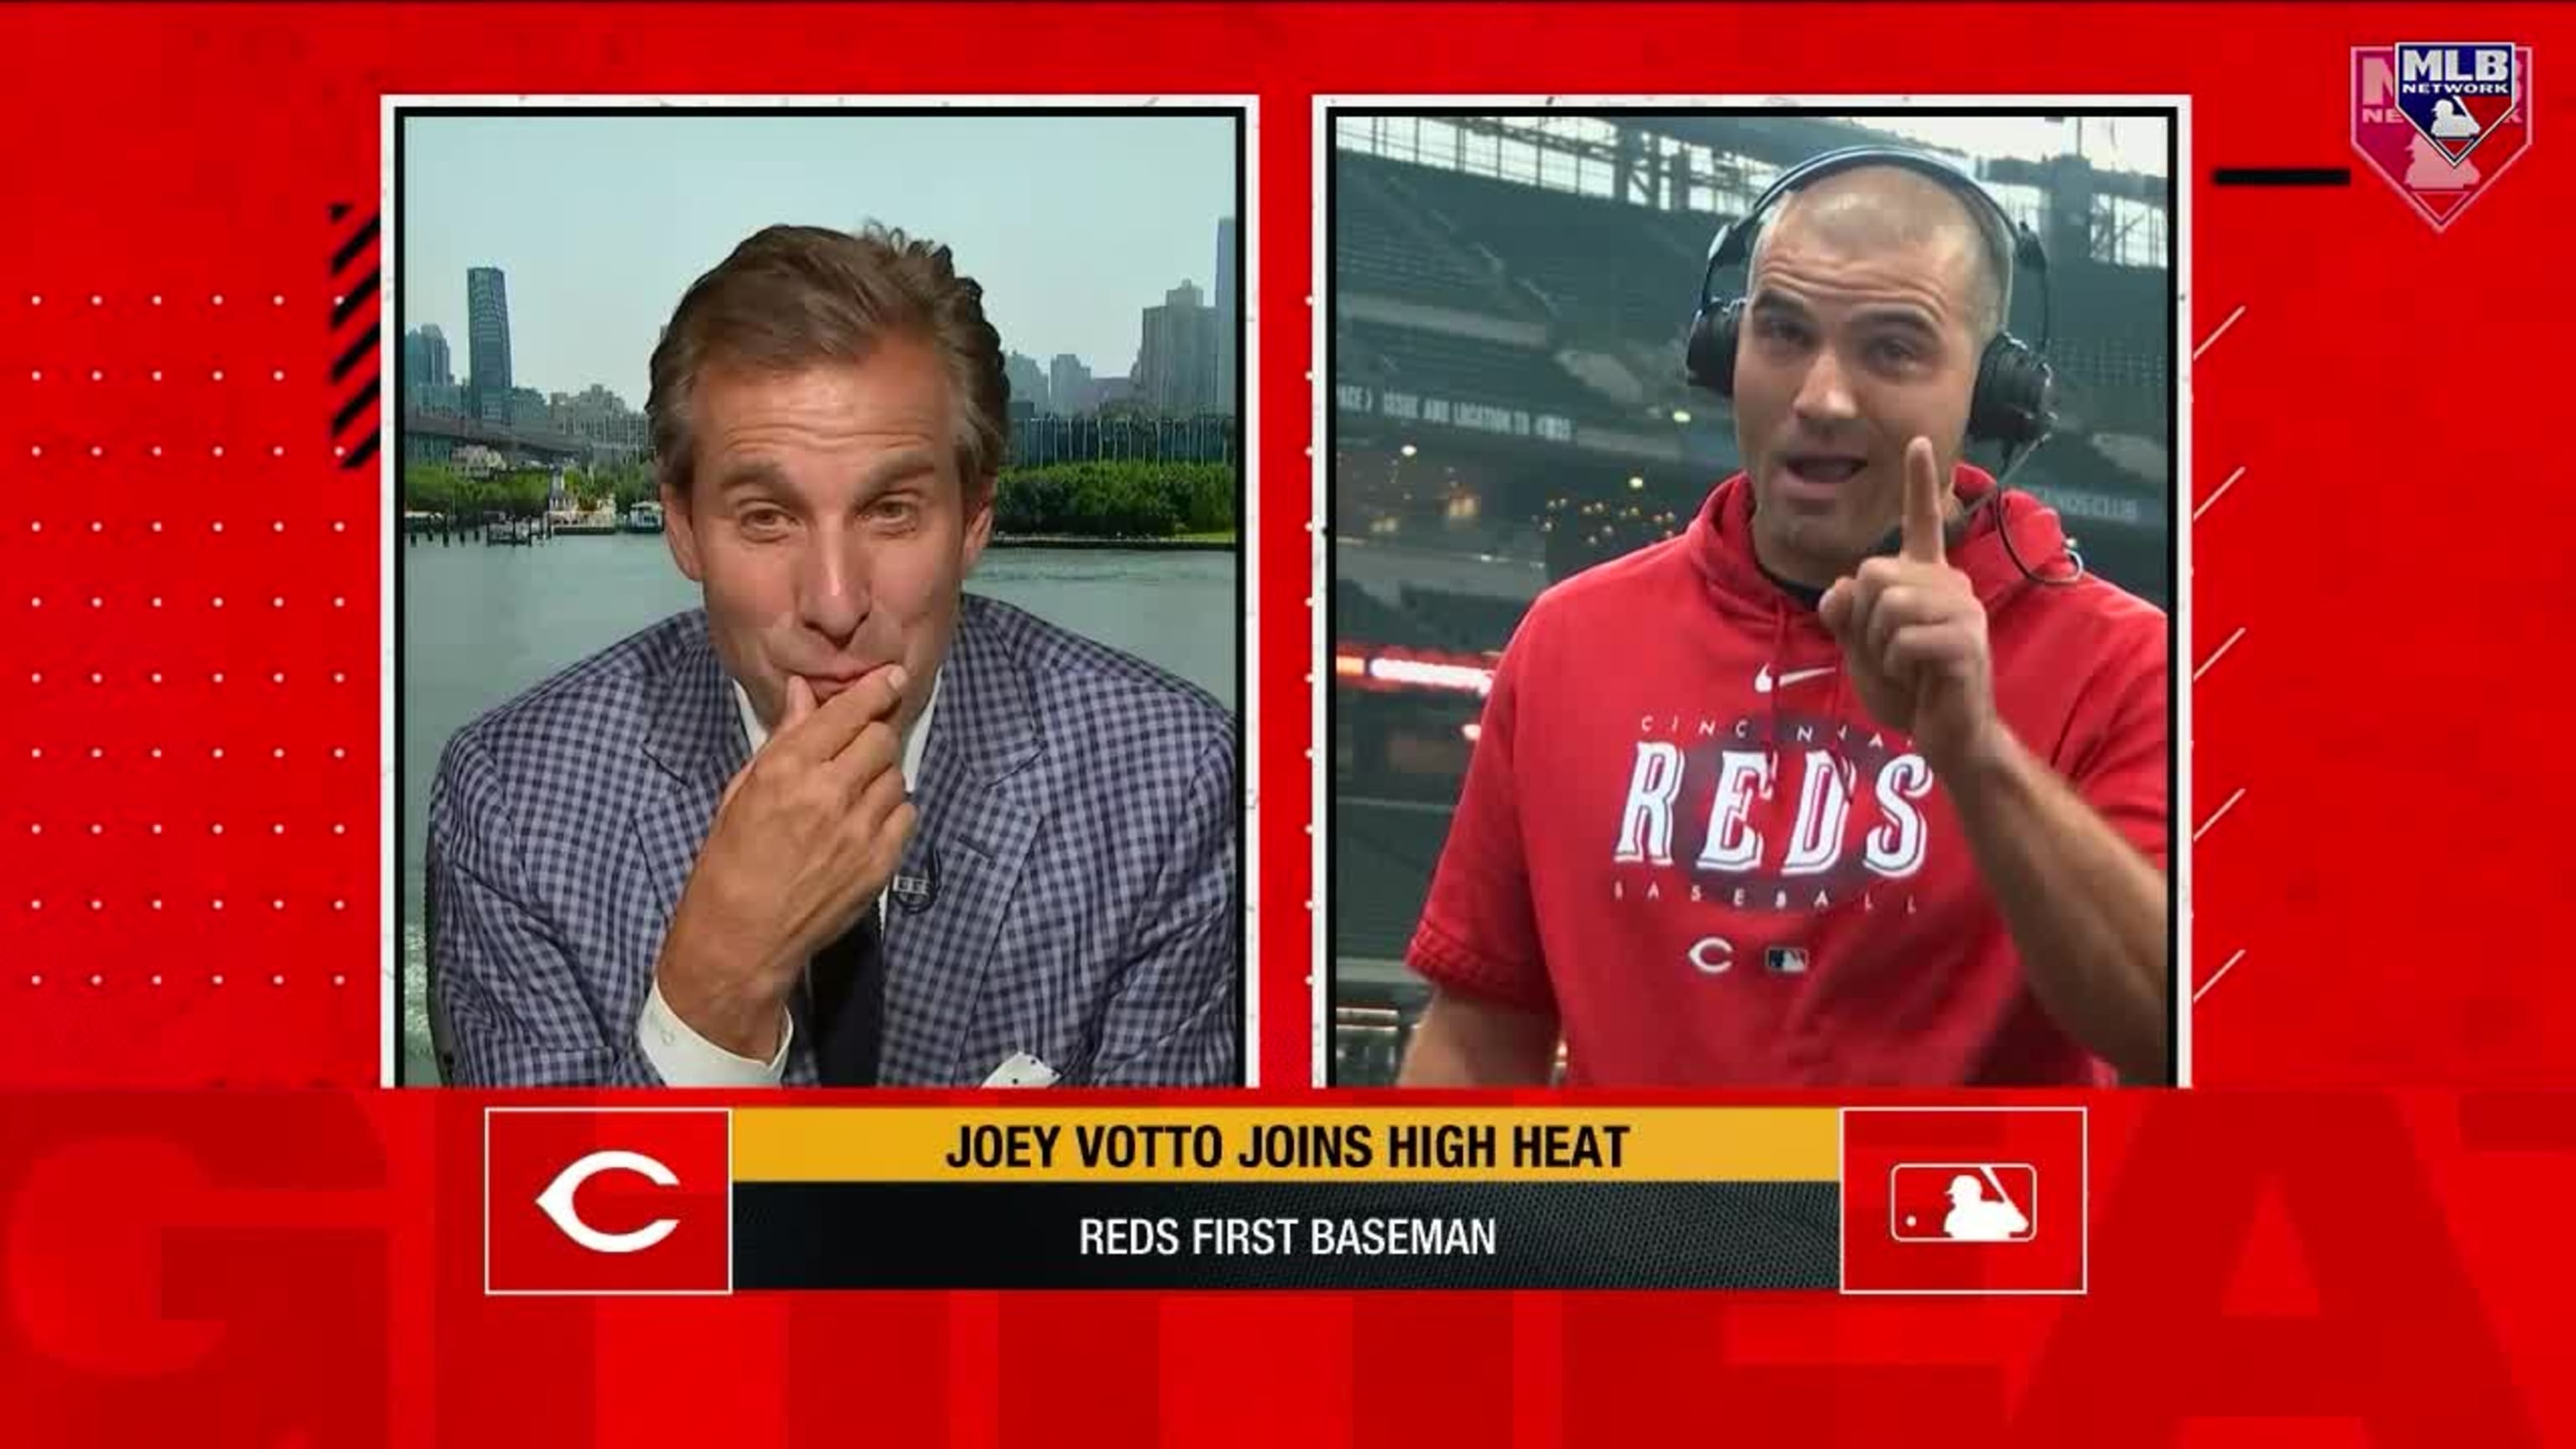 Cincinnati Reds Gift Guide: 10 must-have Joey Votto items